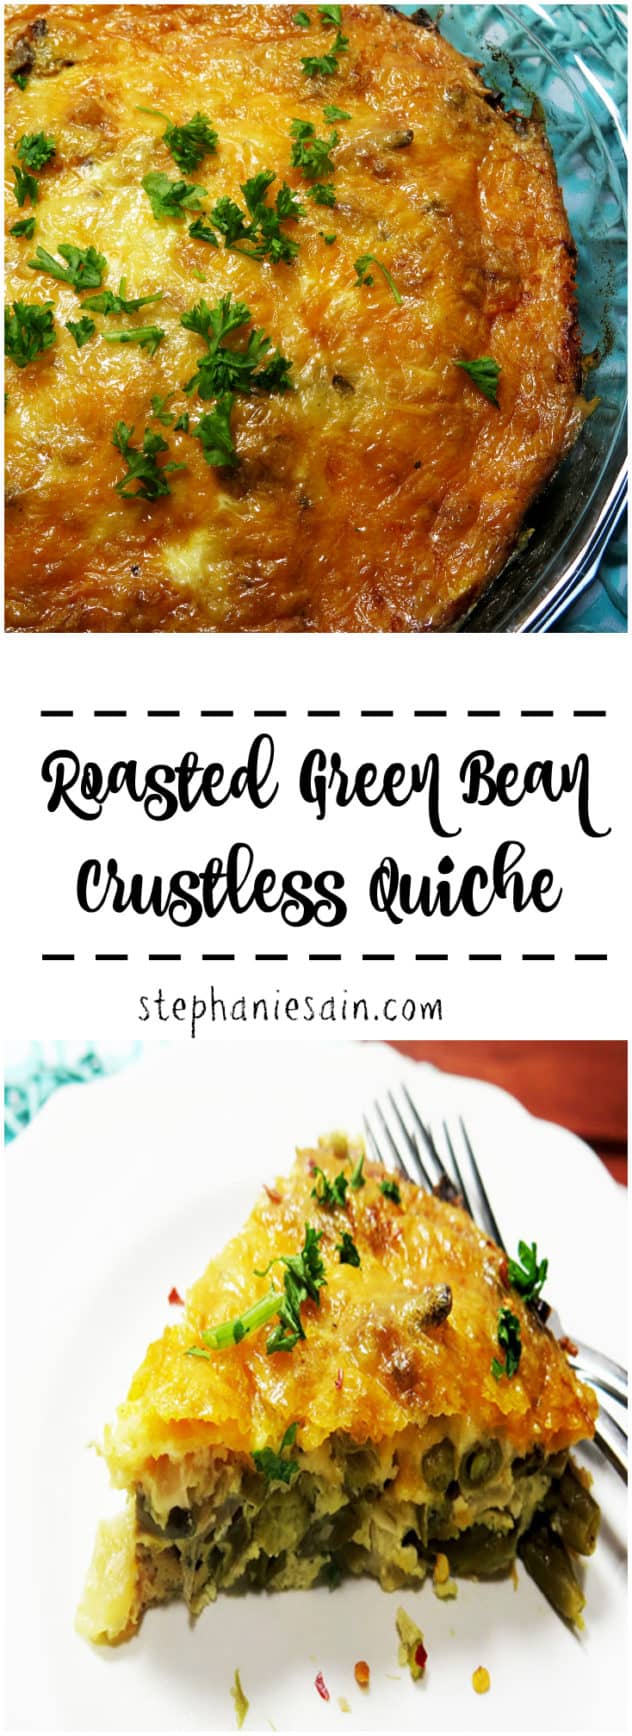 Roasted Green Bean Crustless Quiche is a tasty, healthy quiche that is perfect for brunch or dinner. Vegetarian and Gluten Free.